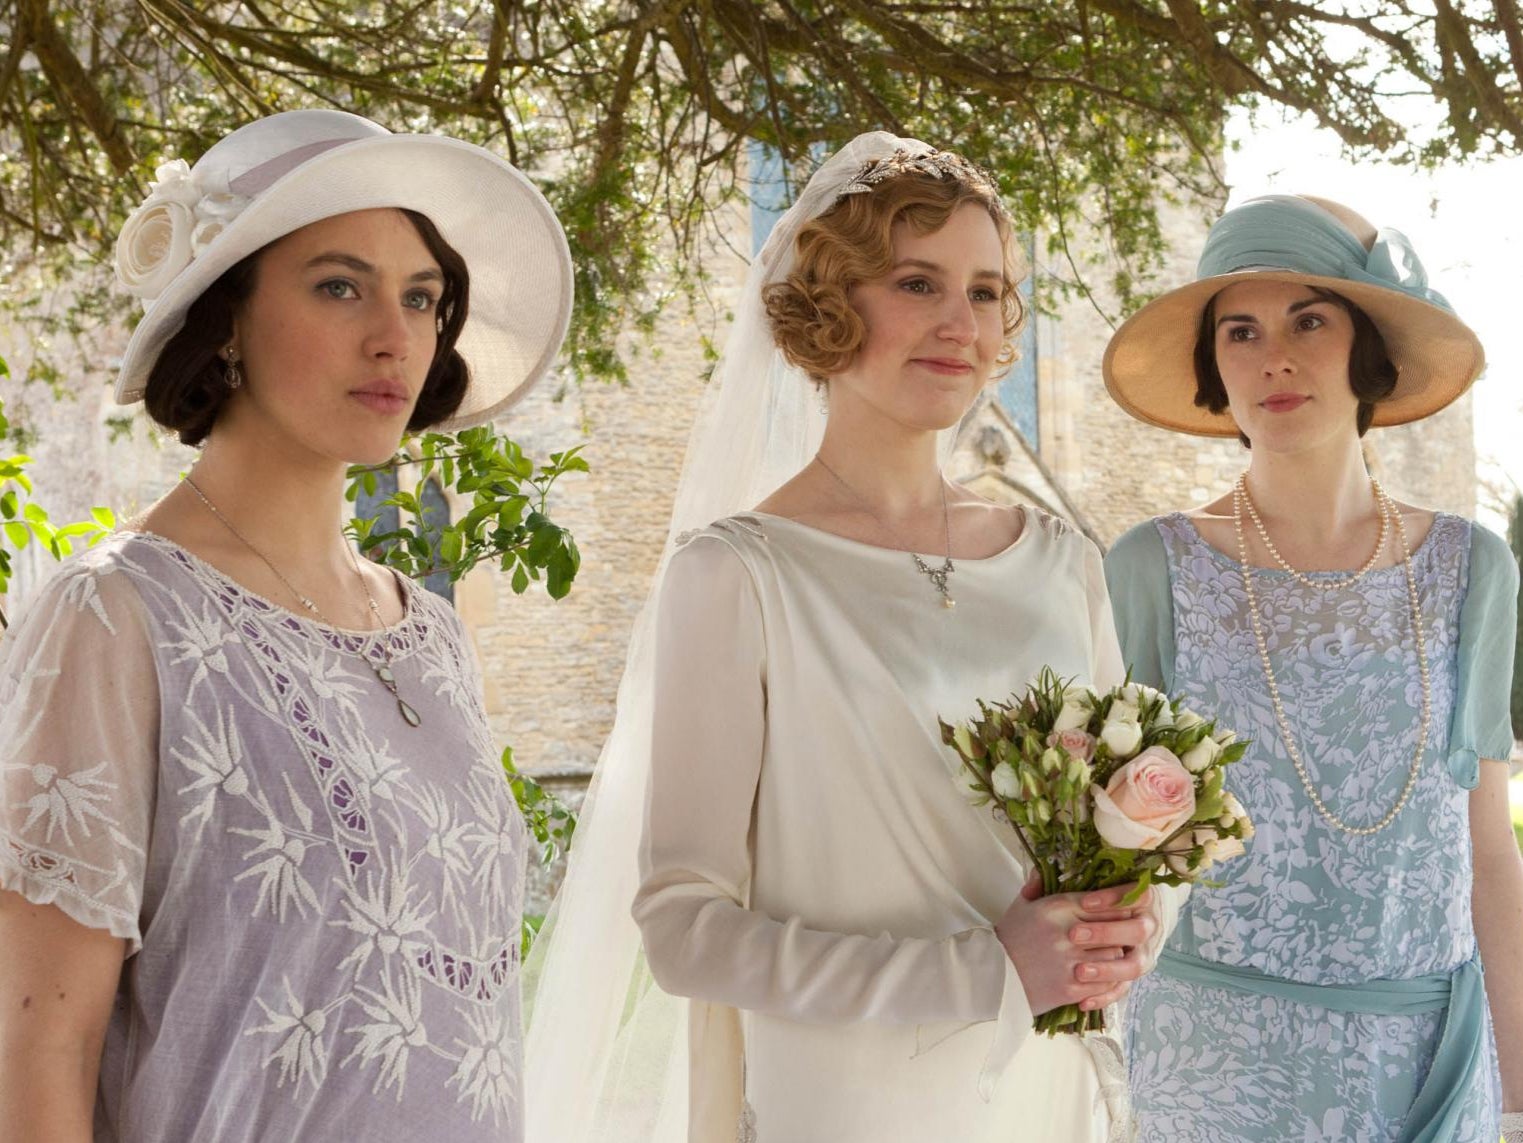 Jessica Brown Findlay, Laura Carmichael and Michelle Dockery in ‘Downton Abbey’